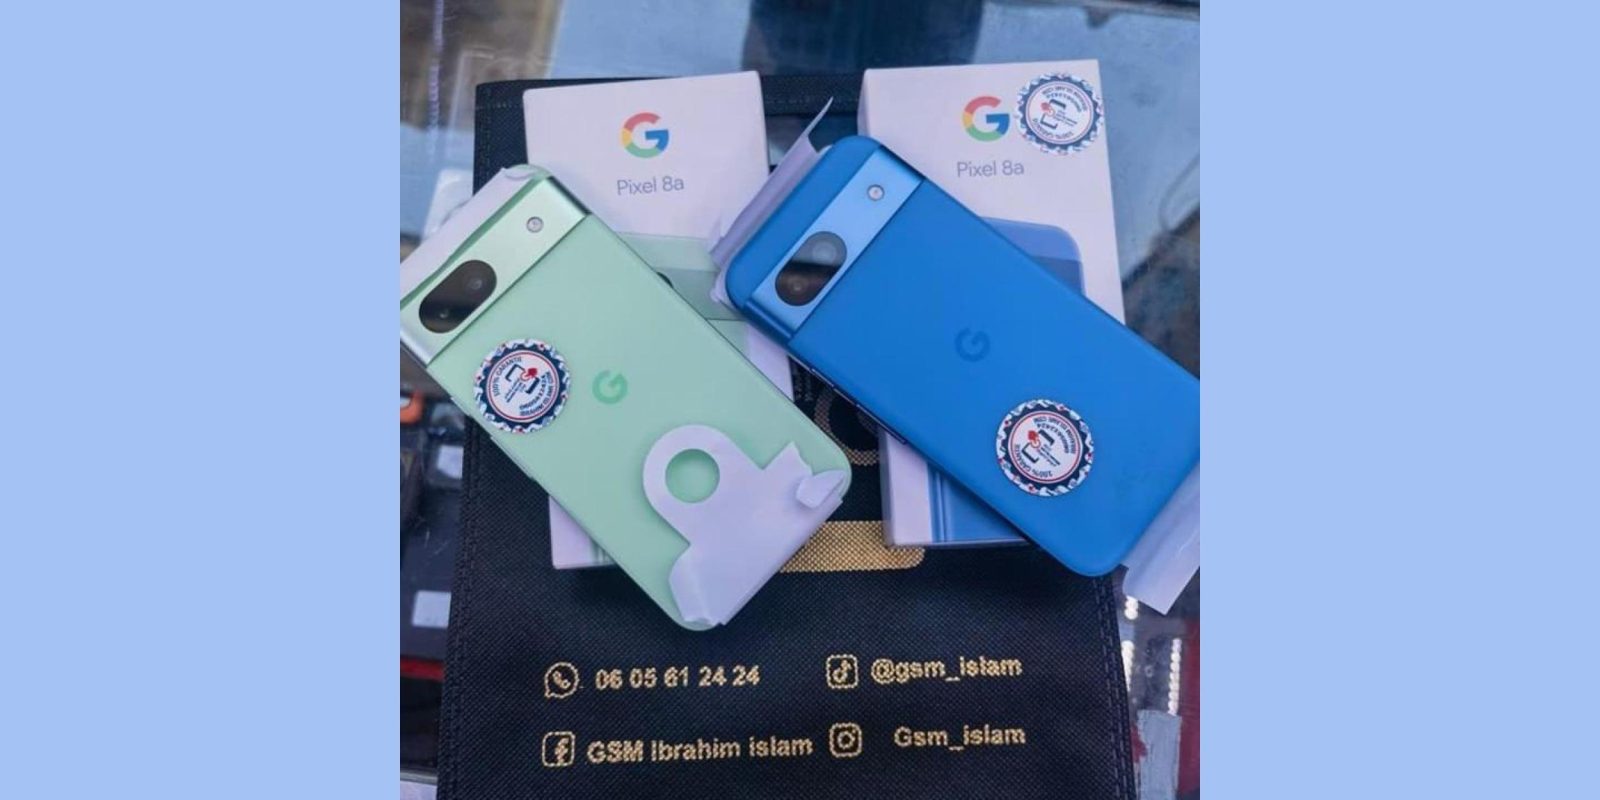 Pixel 8a leaks in new real-life image showing off vibrant blue and green colors